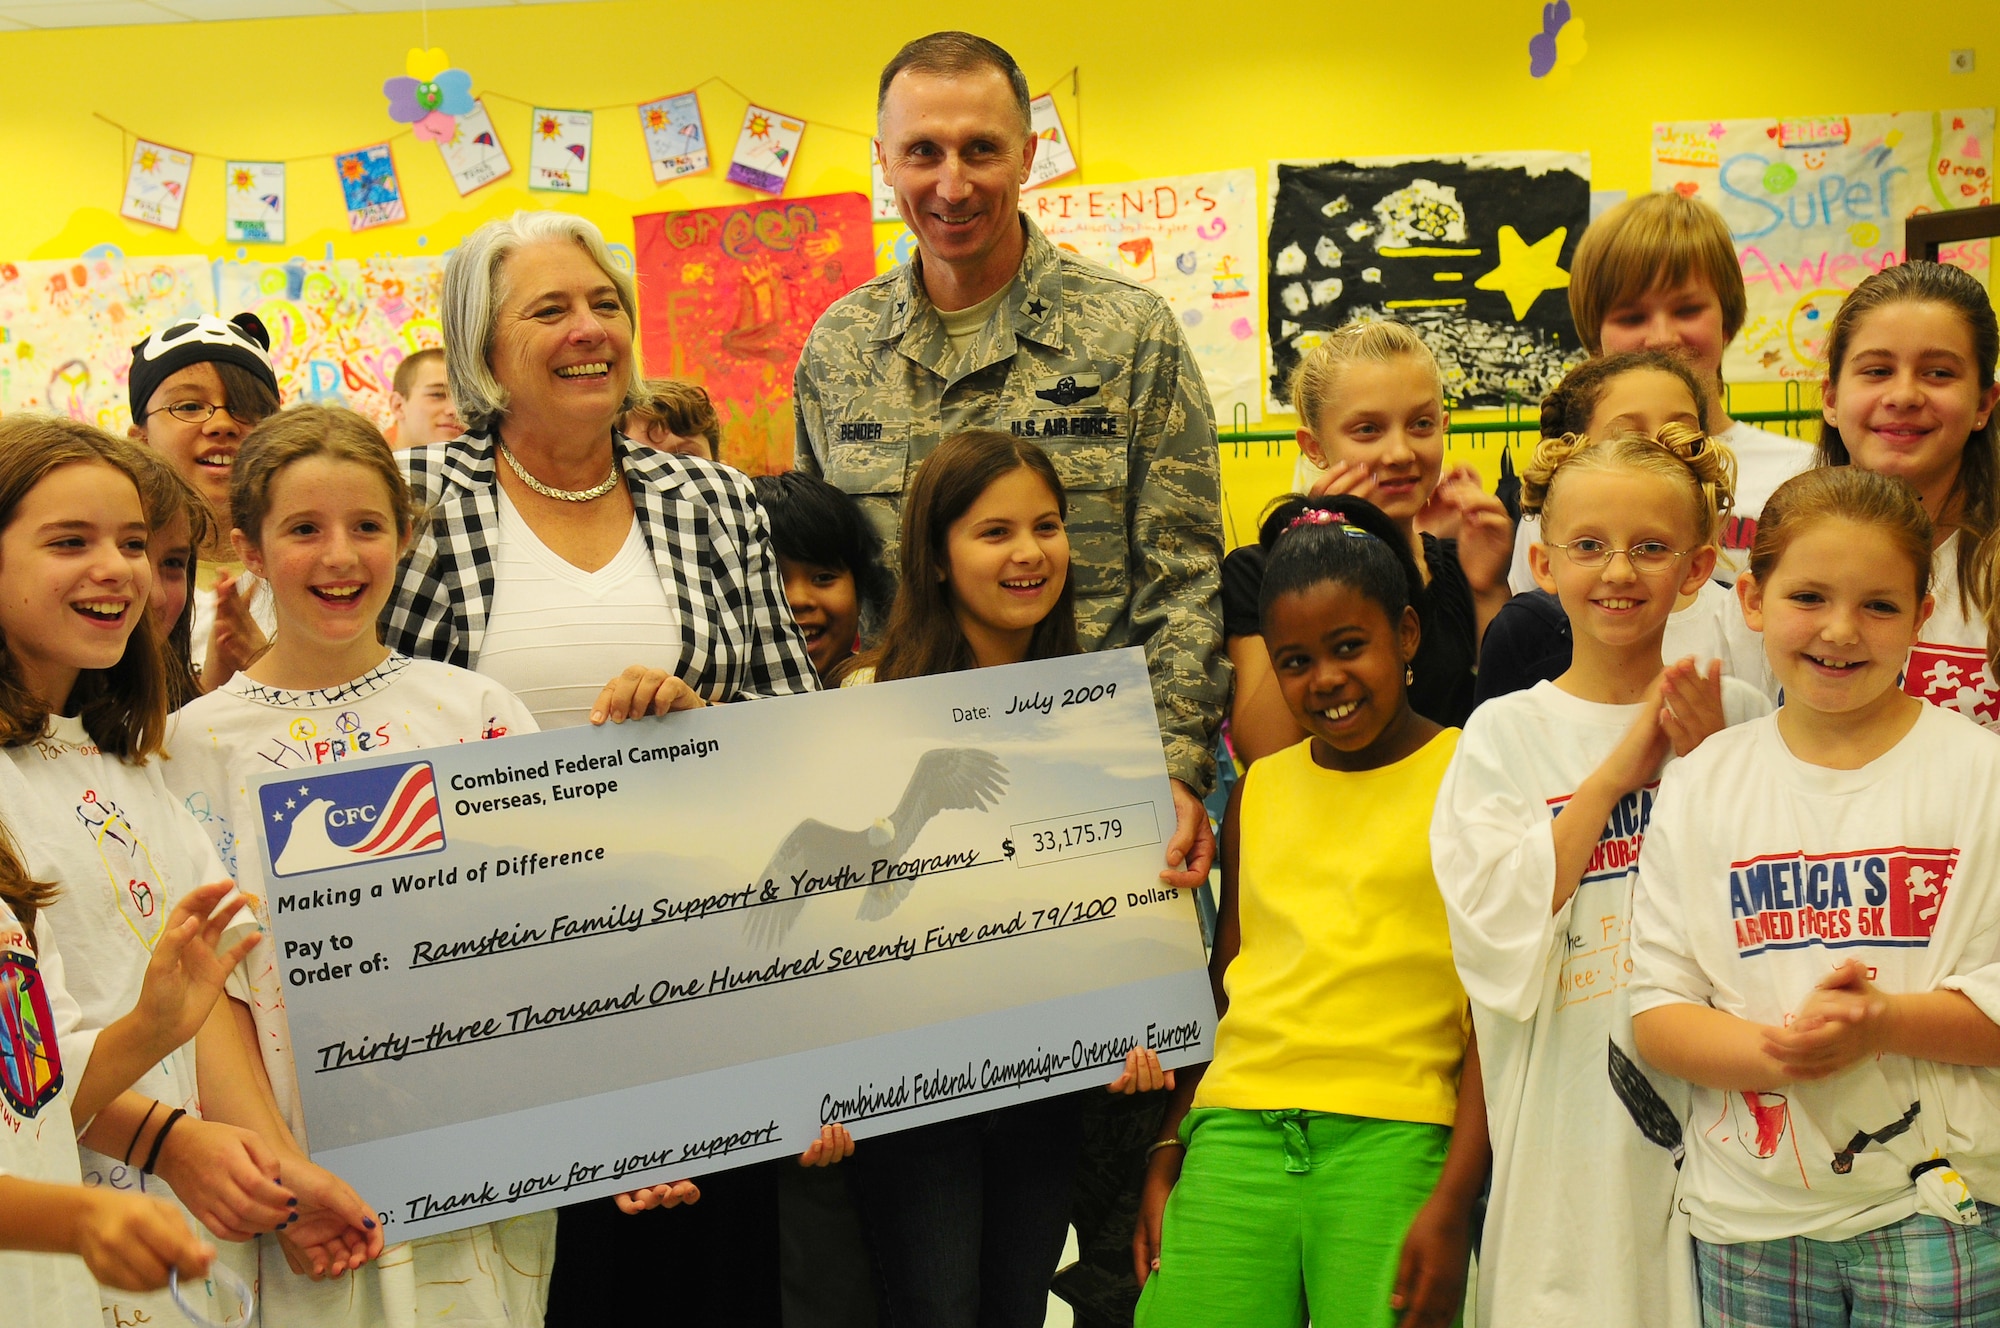 Renee Acosta, president and CEO of Global Impact, Department of Defense campaigns management organization for the Combined Federal Campaign-Overseas presents a ceremonial check for more than $30,000 Jul. 21 to presents Brig. Gen. Bill Bender, 86th Airlift Wing and Kaiserslautern Military Community commander at the youth center, Ramstein Air Base, Germany. The check represents donations that civilian and military employees in Ramstein donated to Family Support and Youth Programs through CFC-O during the 2008 campaign. (U.S. Air Force photo by Airman 1st Class Alexandria Mosness)